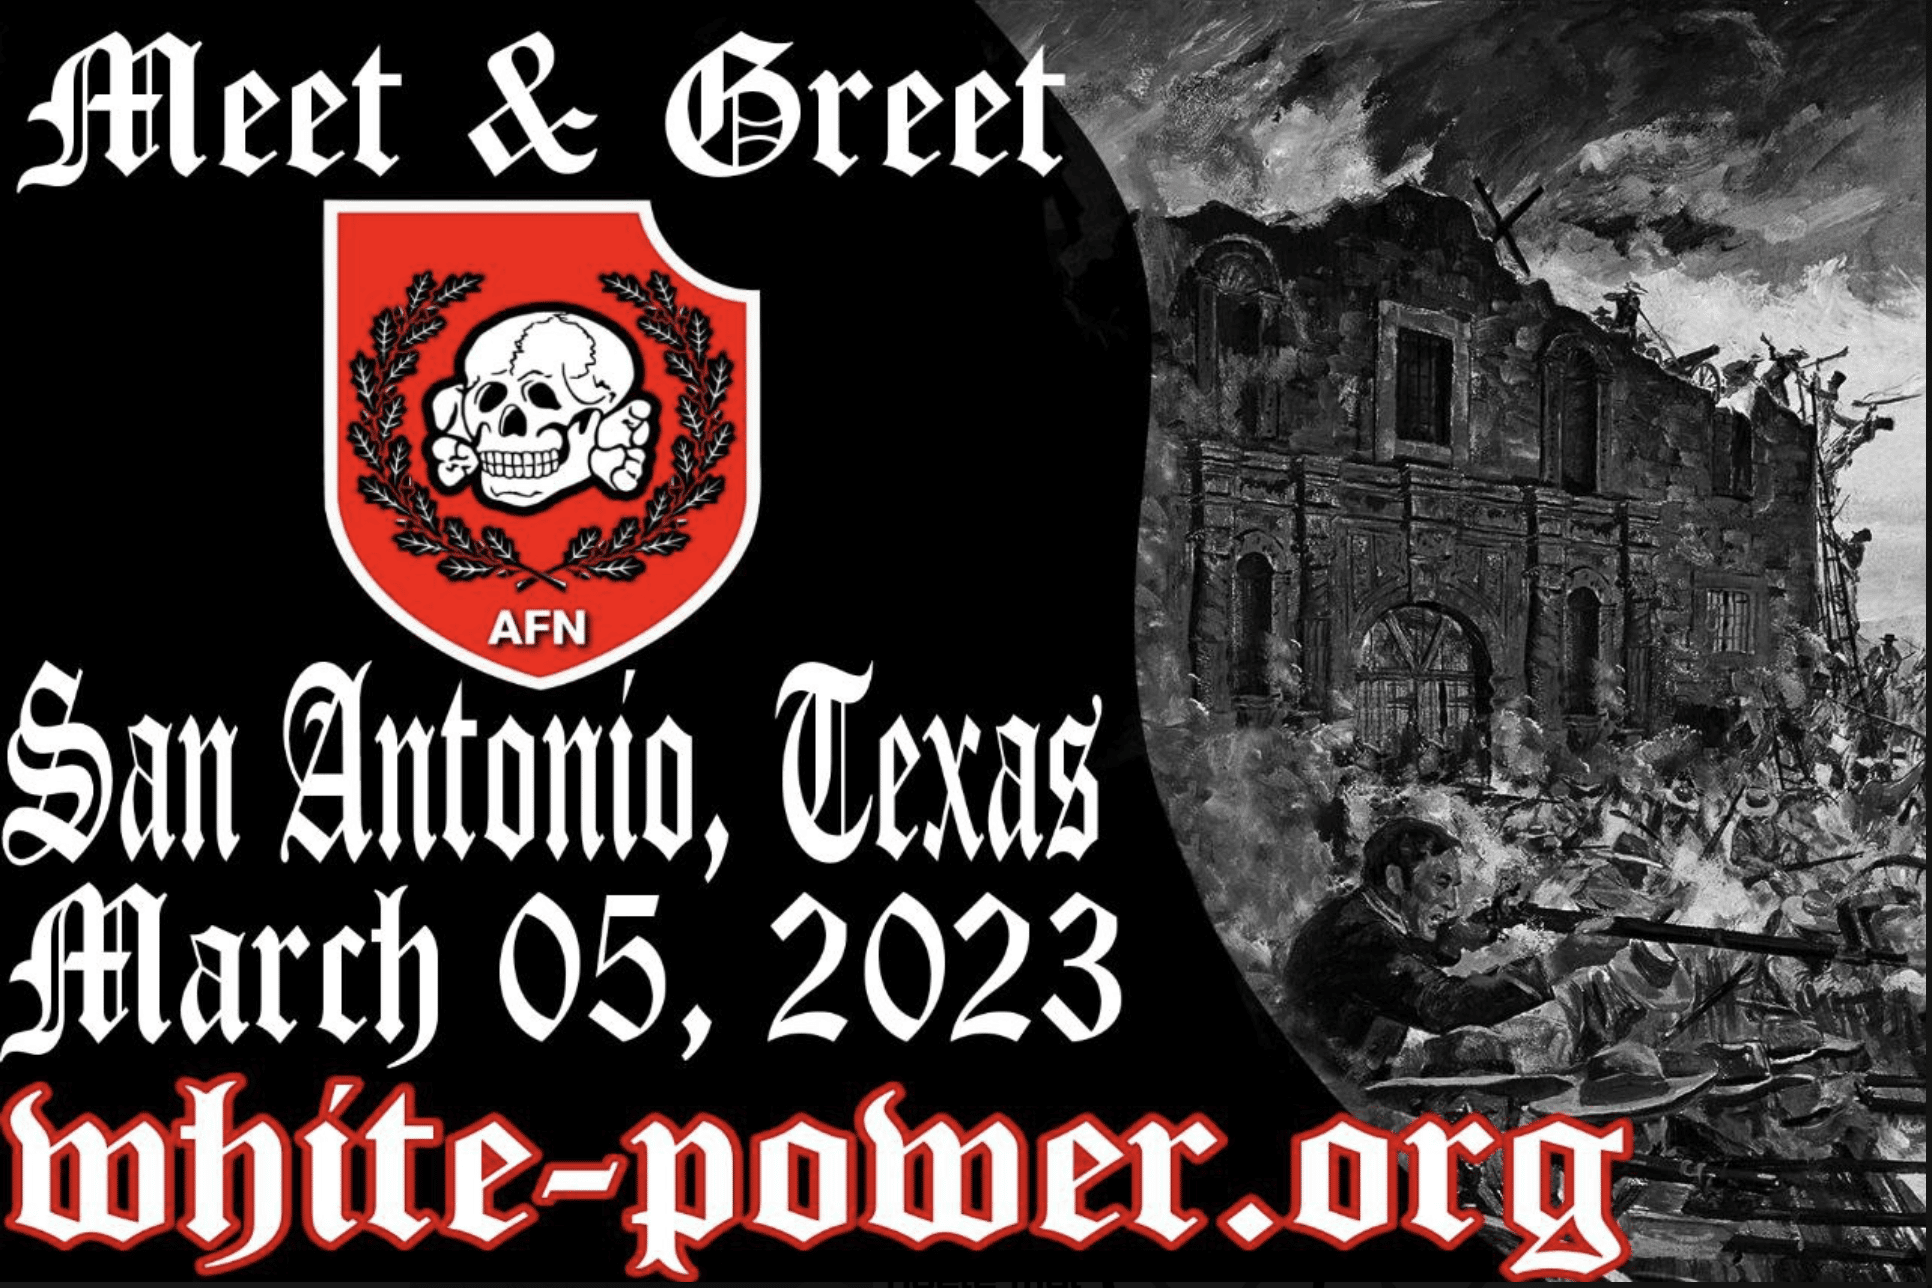 (Right Wing Extremism/Poster) Aryan Freedom Network (AFN) Planning to Host a Meet & Greet on 5 March 2023 in San Antonio, Texas, United States – 8 February 2023